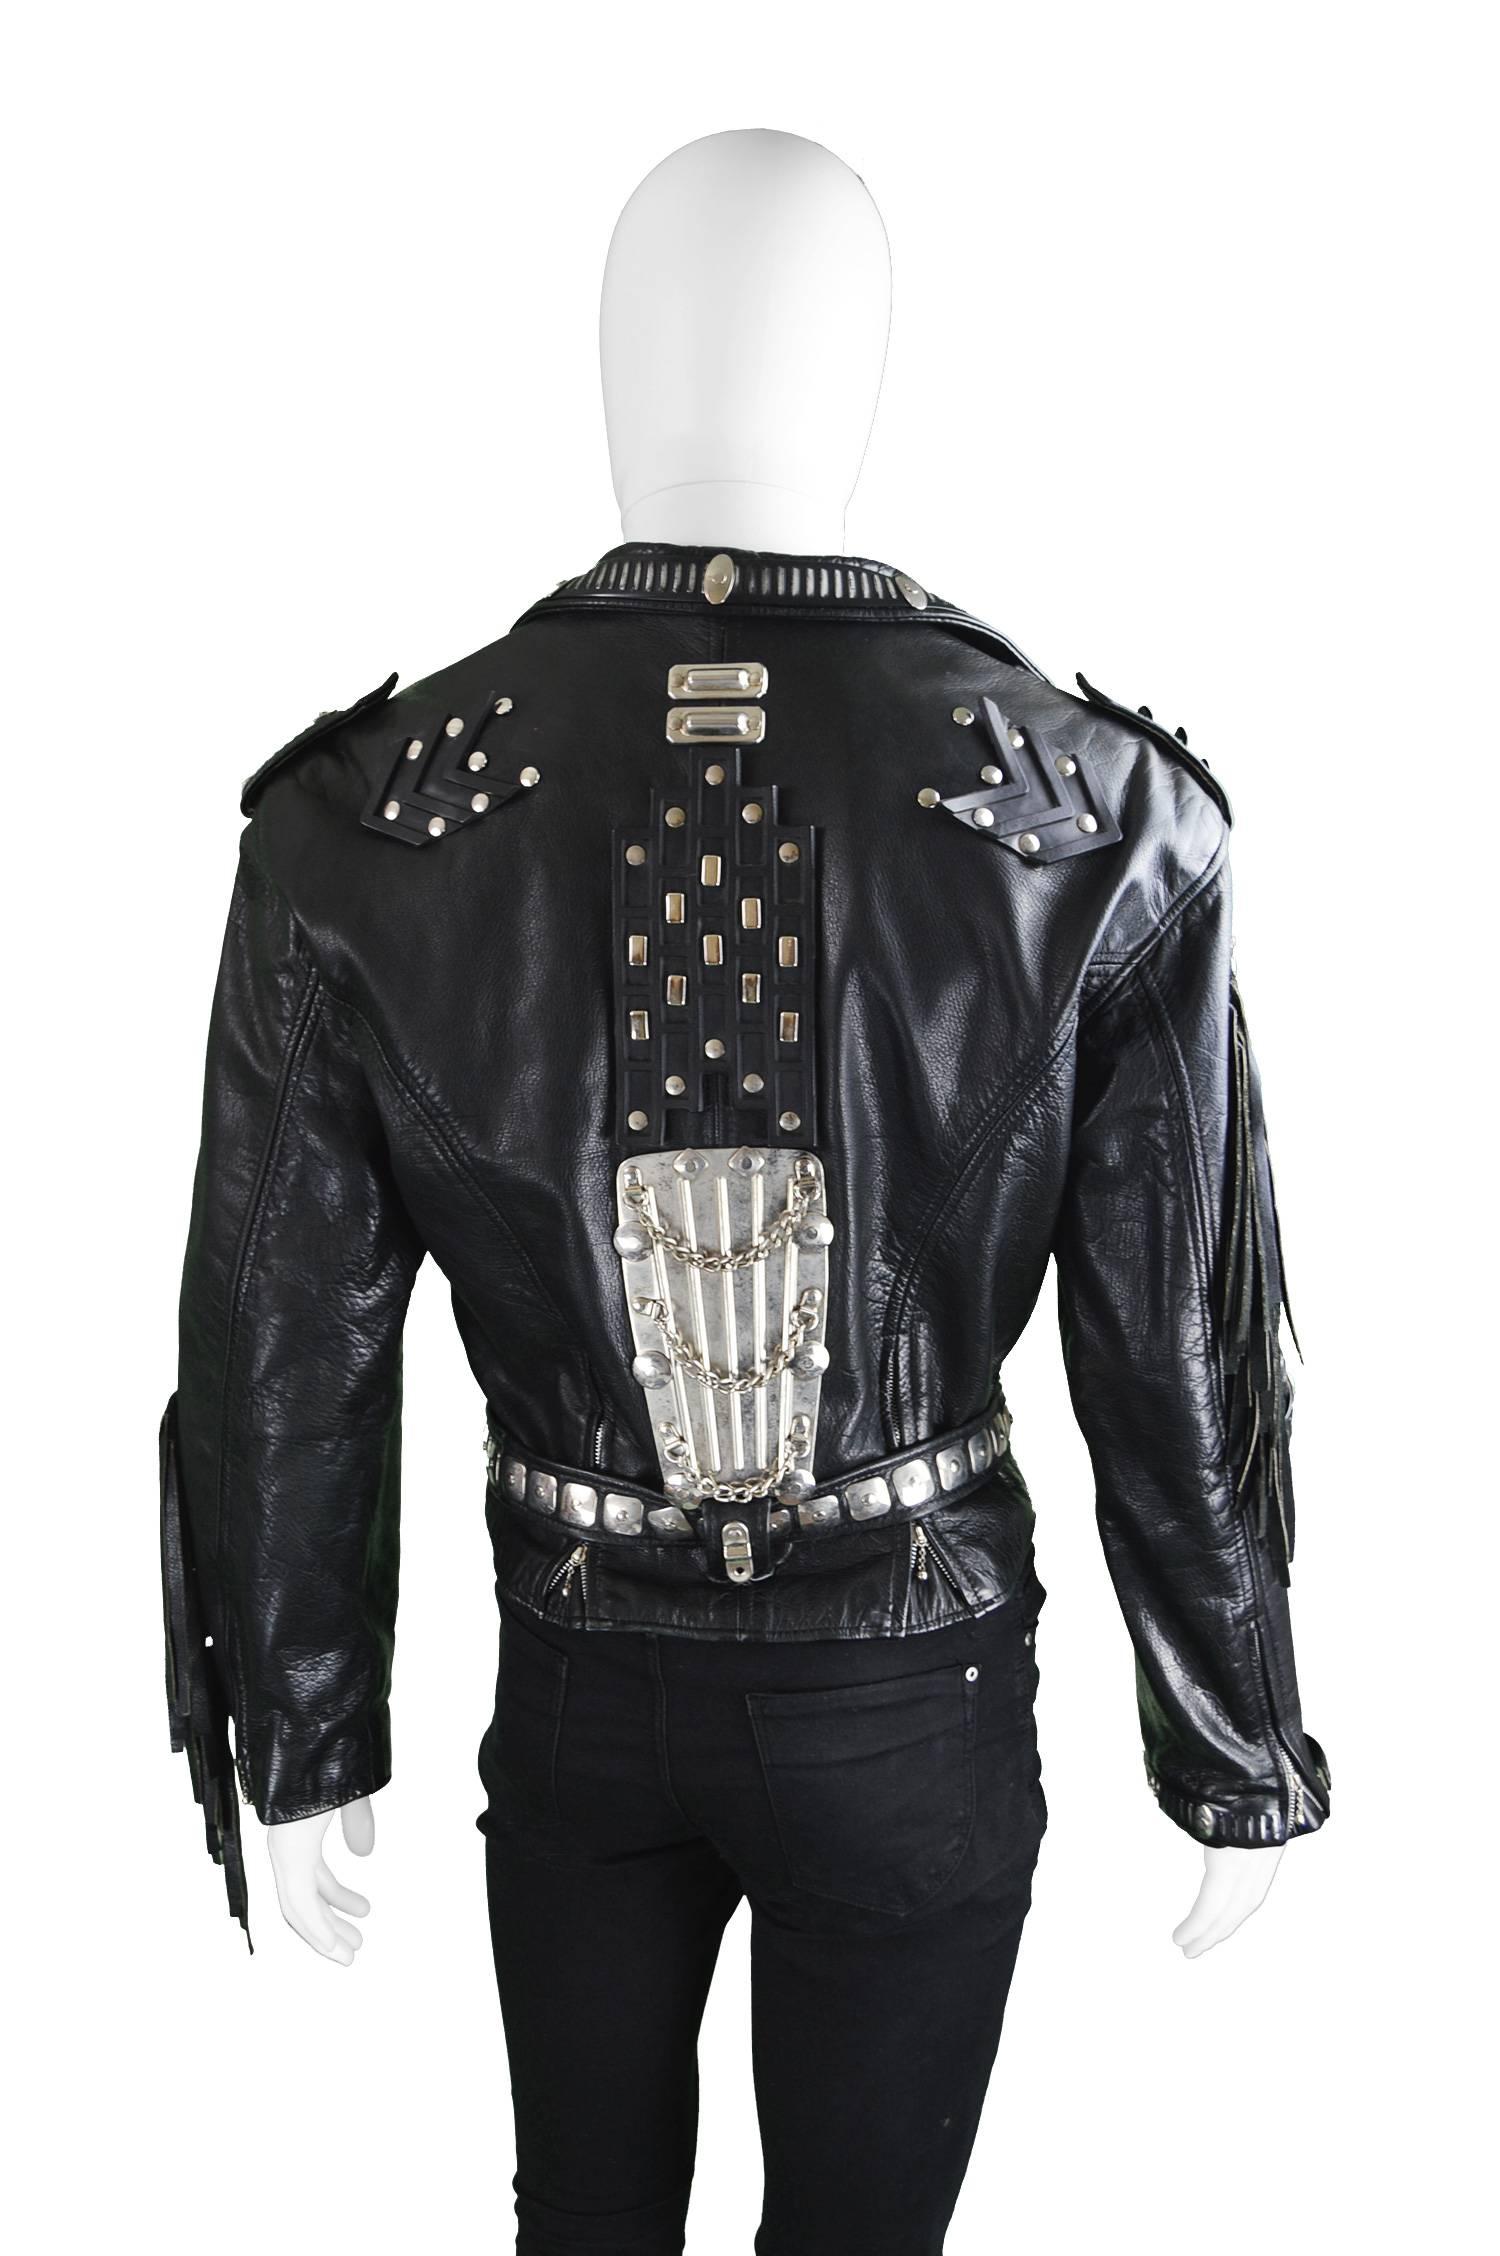 Kim Hadleigh Designs Vintage Men's Armor Plated Leather Jacket, 1980s In Excellent Condition In Doncaster, South Yorkshire